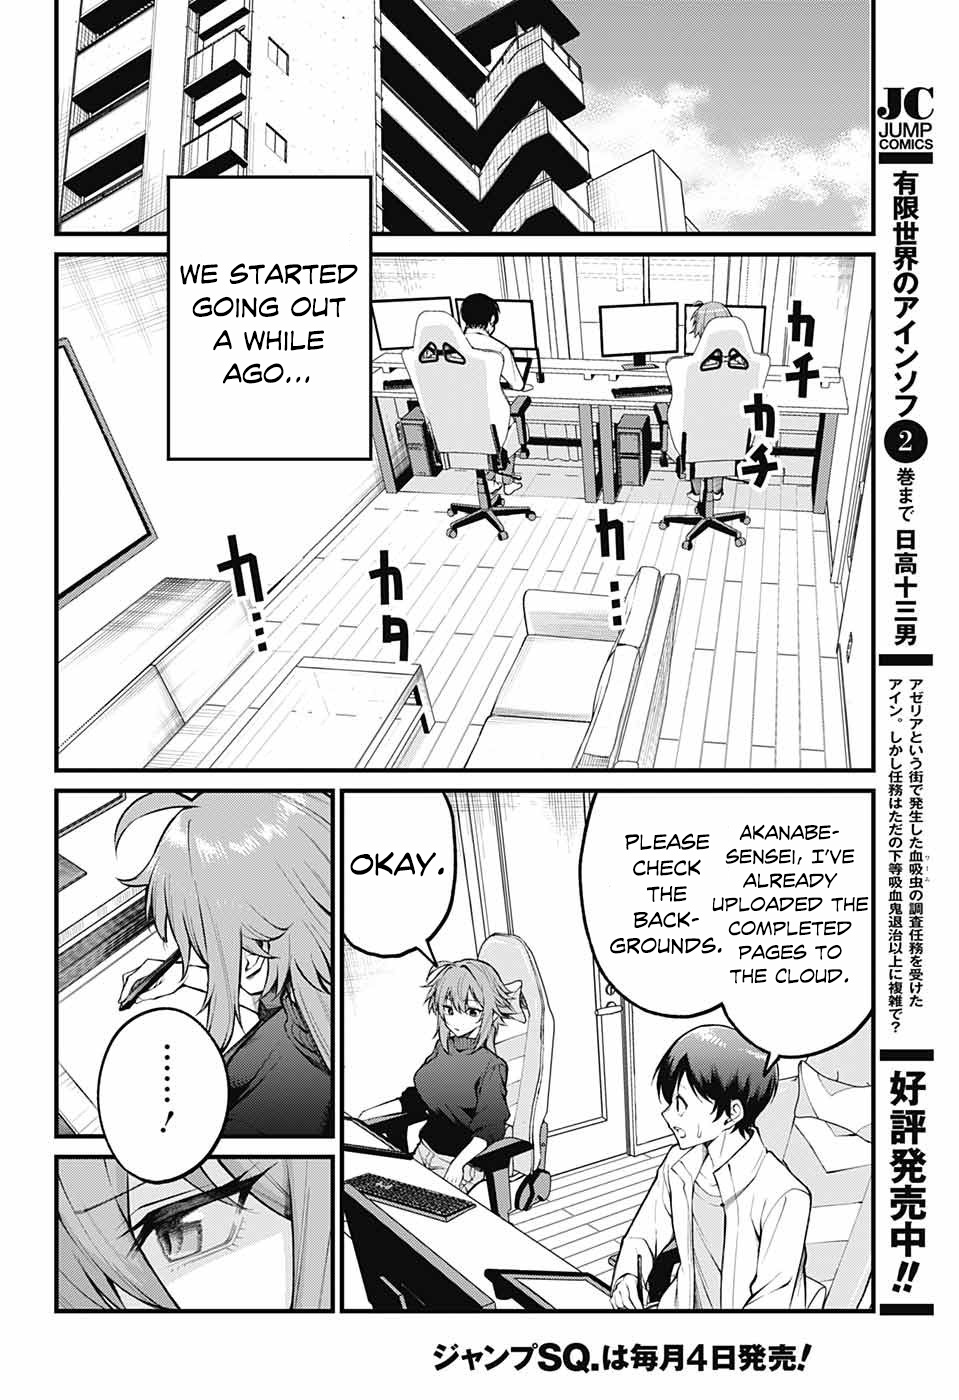 Akanabe-Sensei Doesn't Know About Embarrassment - Page 4